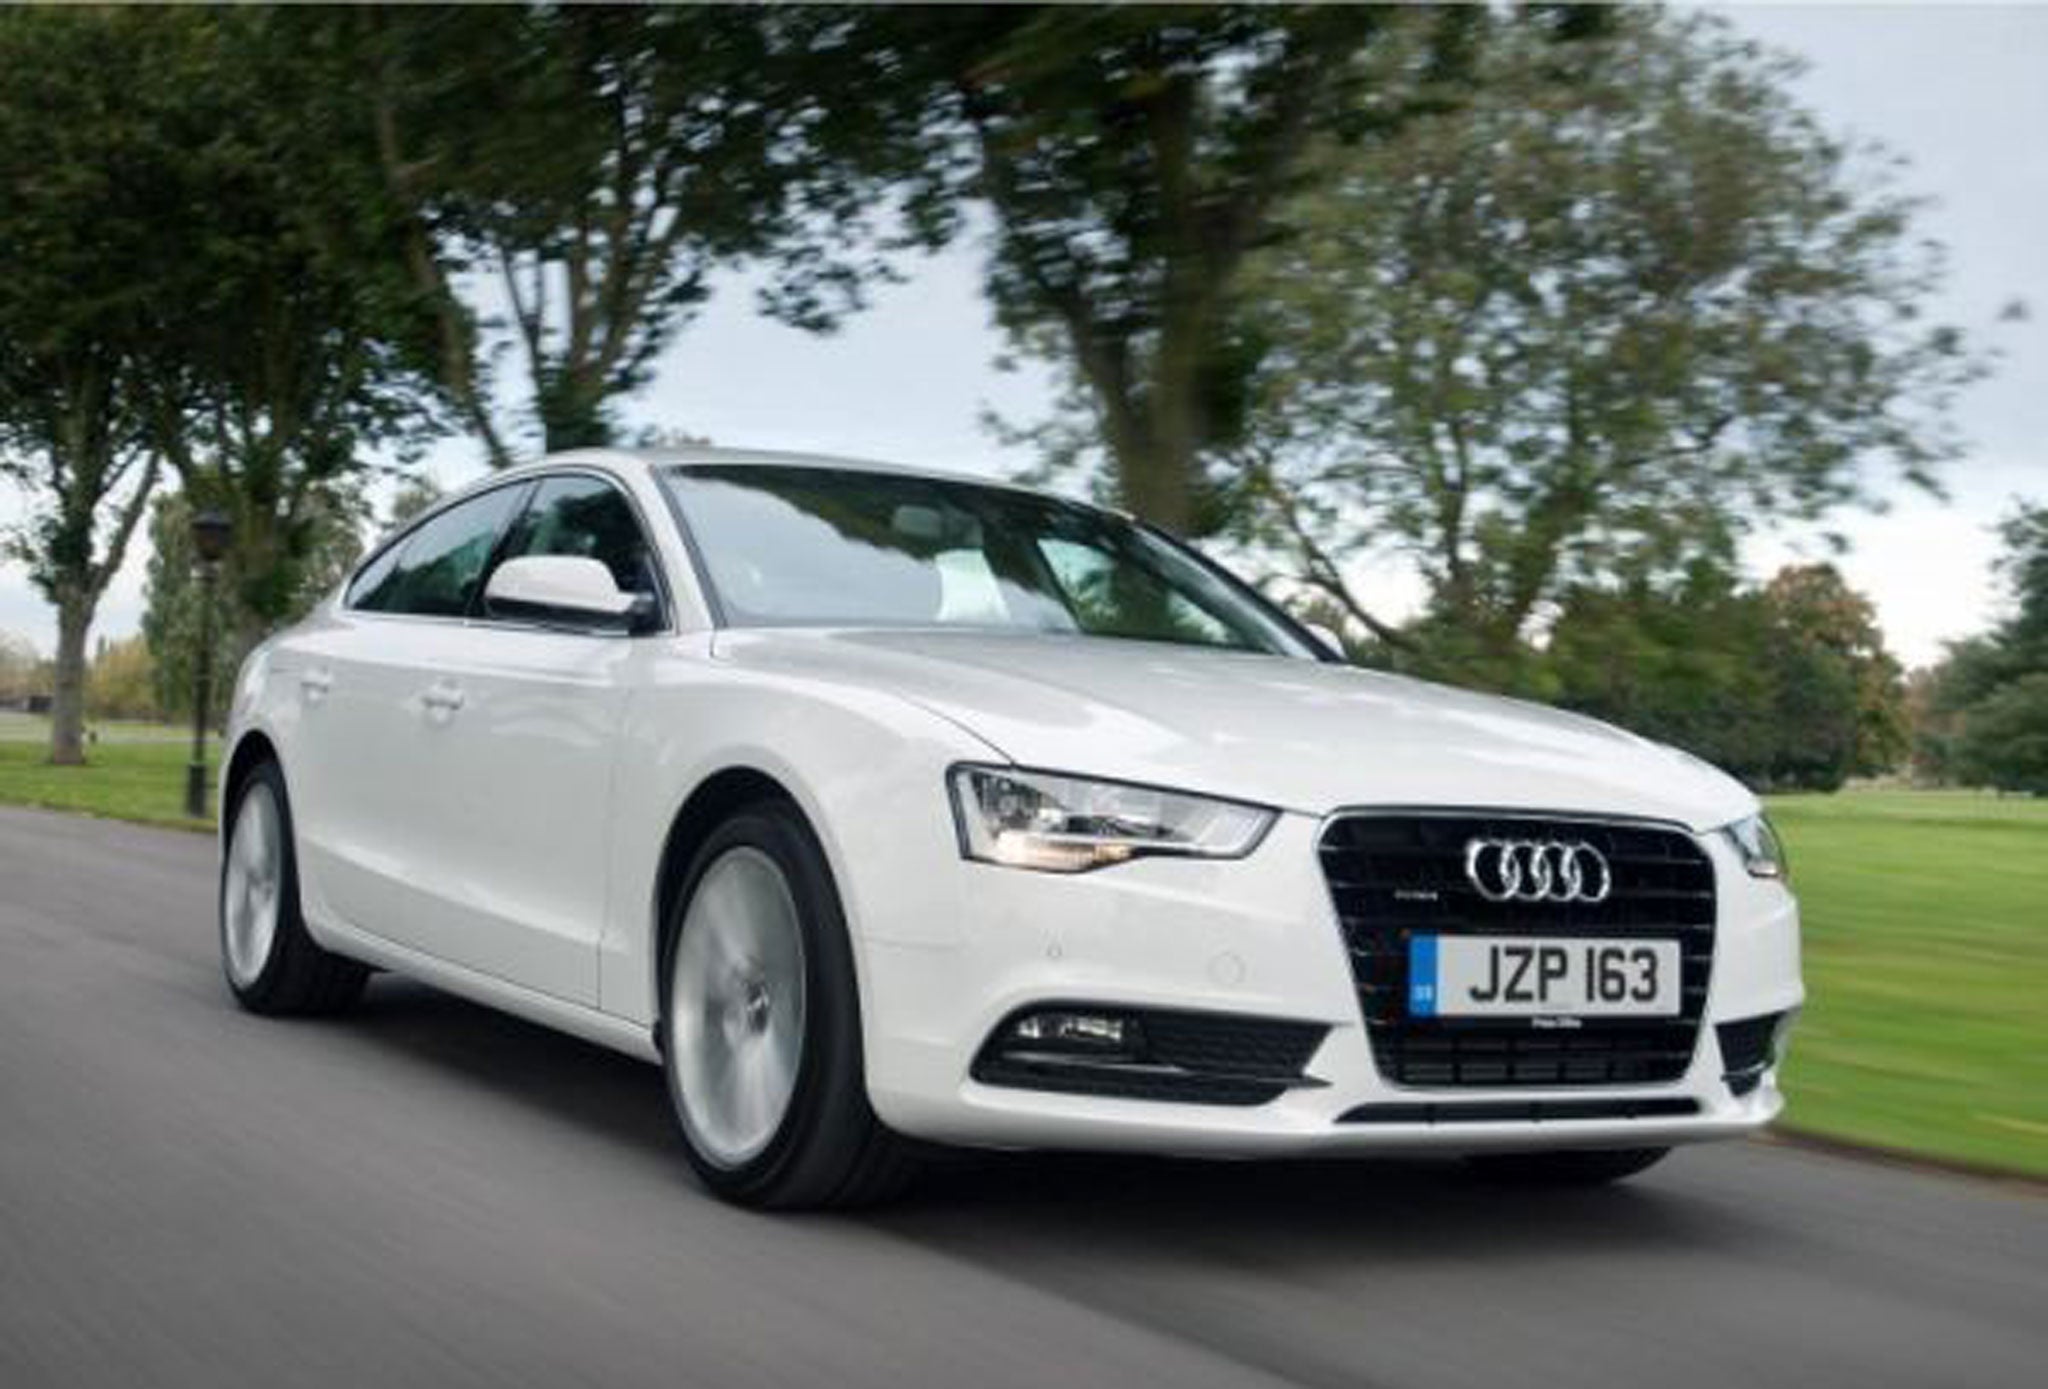 One for the road: An upgrade for an old Audi A4 diesel | The Independent